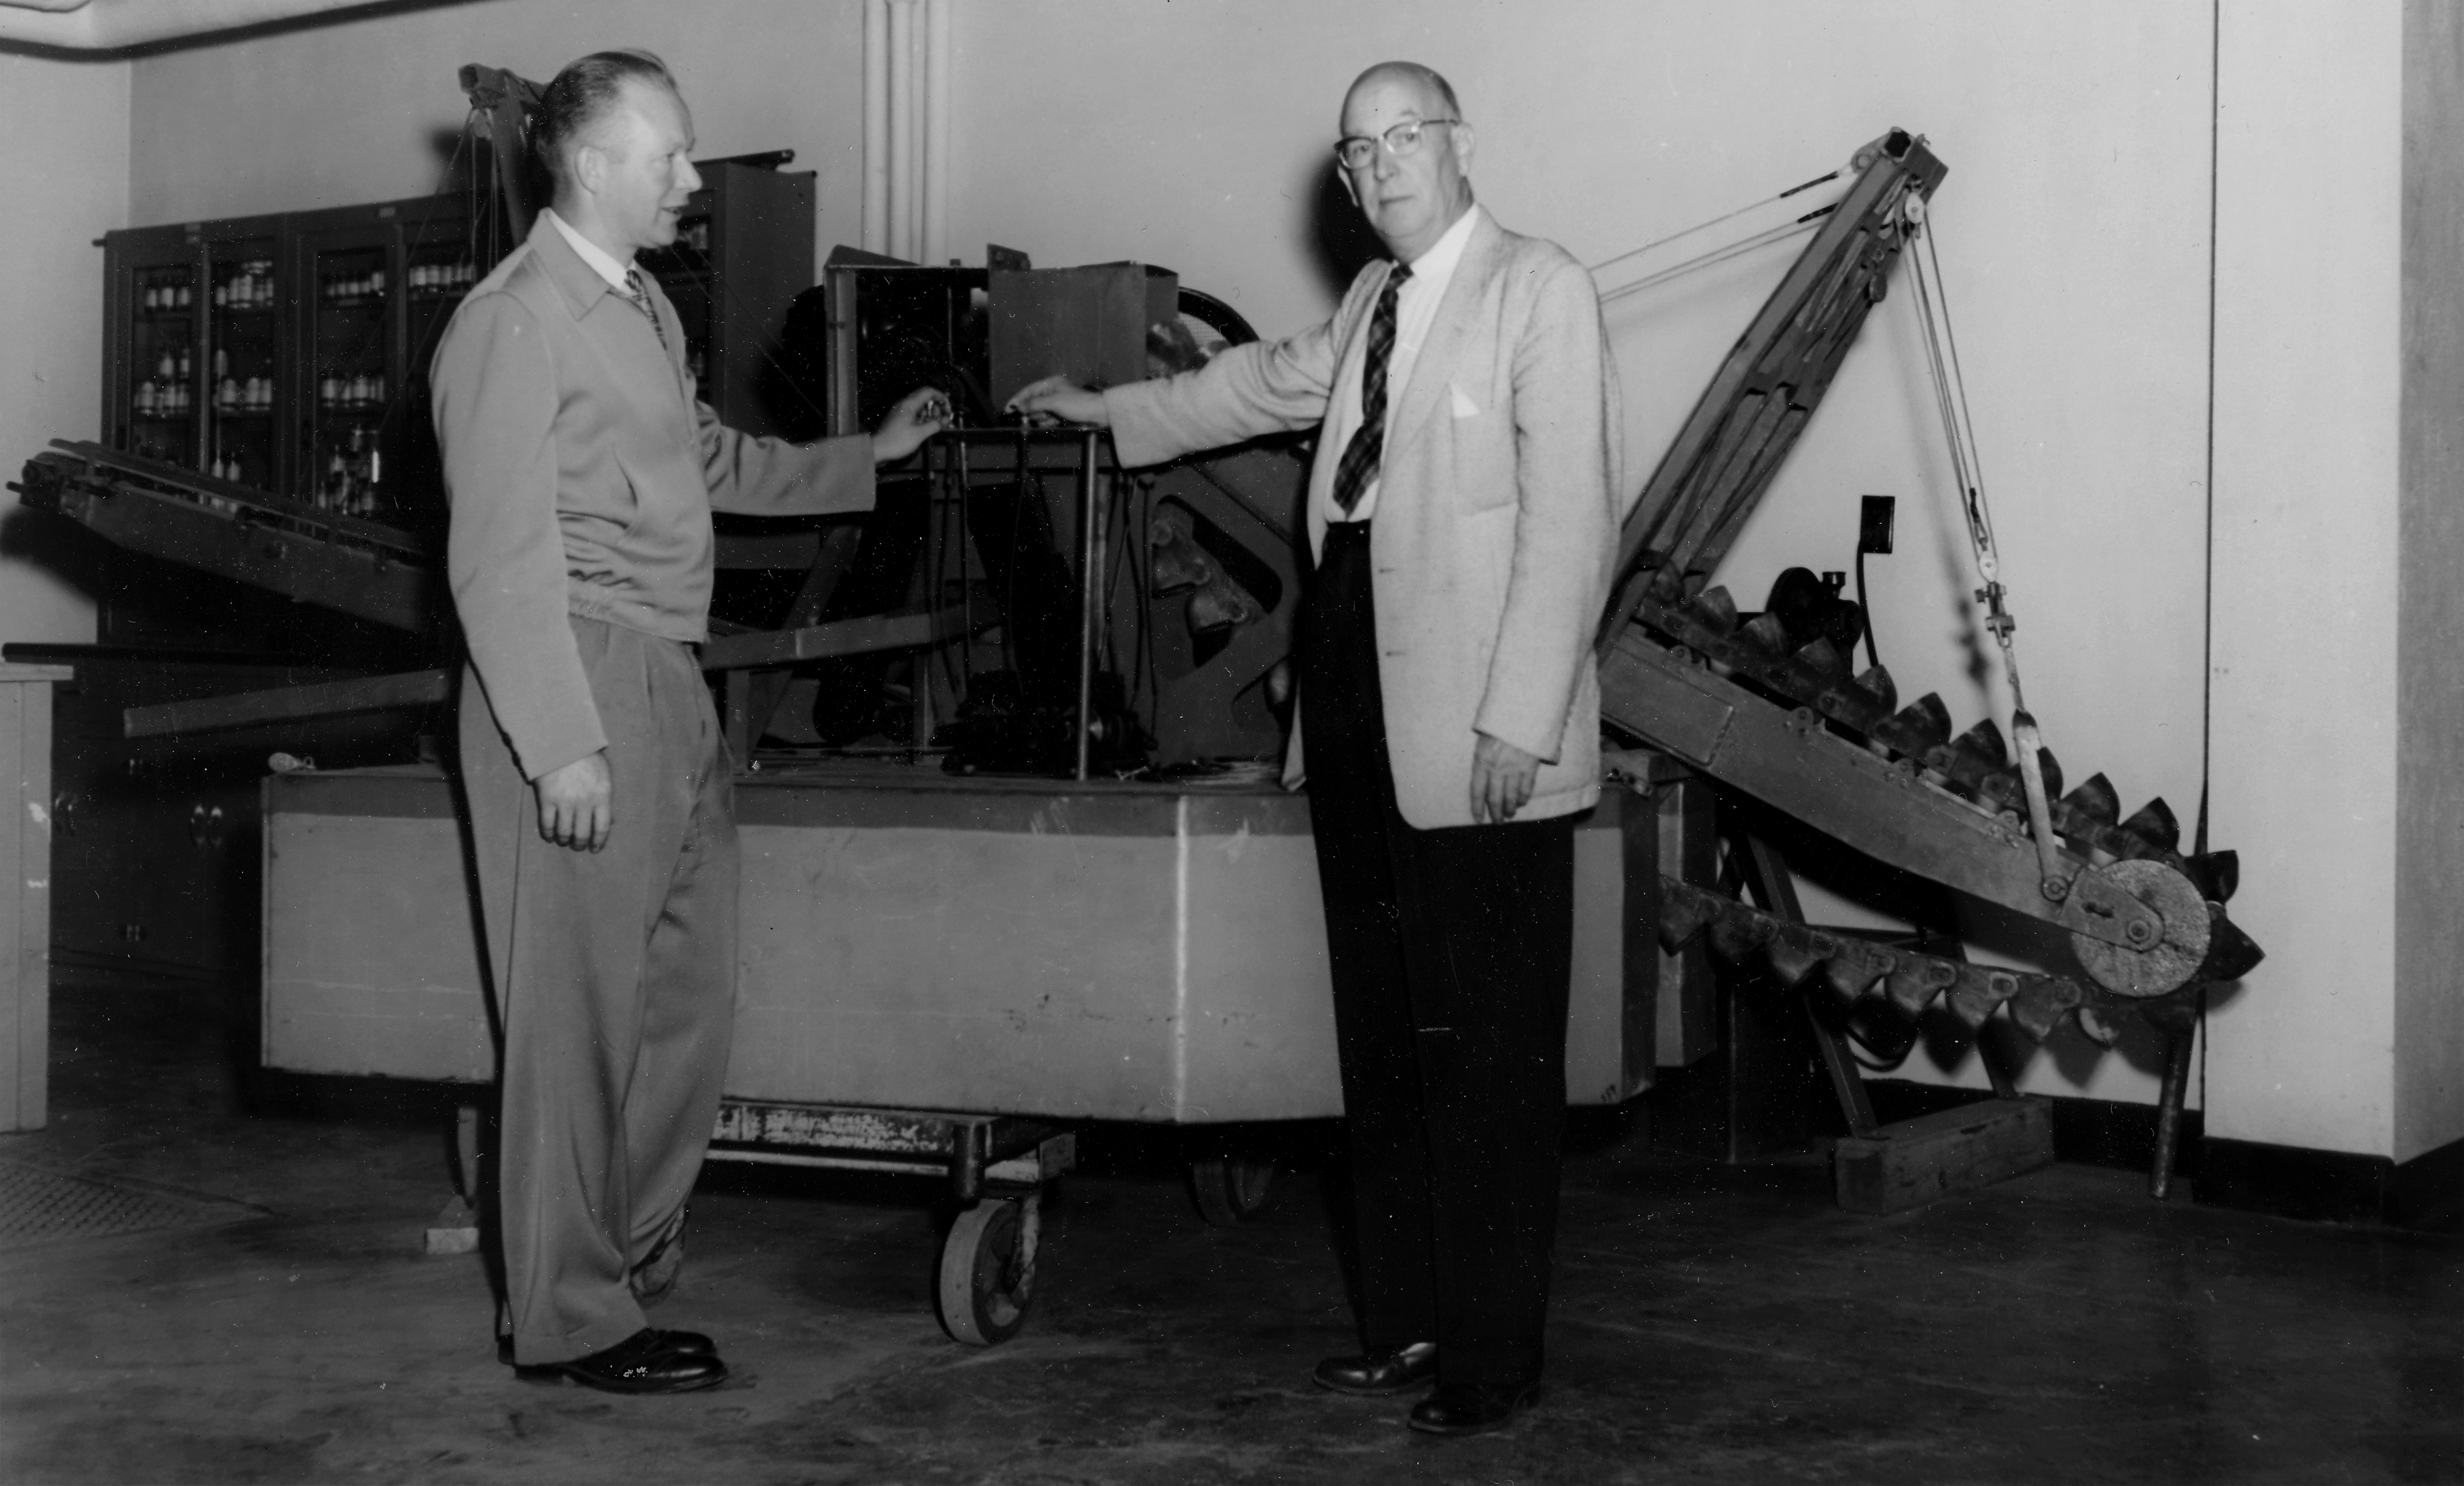 School of Mines Dean Earl Beistline, left, and UA President Ernest Patty inspect a working model of a gold dredge, No. 2 1/2 Nyac. William Race ’42 gave the model to the university in 1958, 20 years after it was built for the New York Alaska Gold Dredging Corp. The company operated full-size dredges at Nyac in Southwest Alaska. Such dredges were an important source of employment for students and graduates of the university’s mining programs. Earl Beistline Collection, Accession number 1985-093-228, Archives, Alaska and Polar Regions Collections, Rasmuson Library, University of Alaska Fairbanks